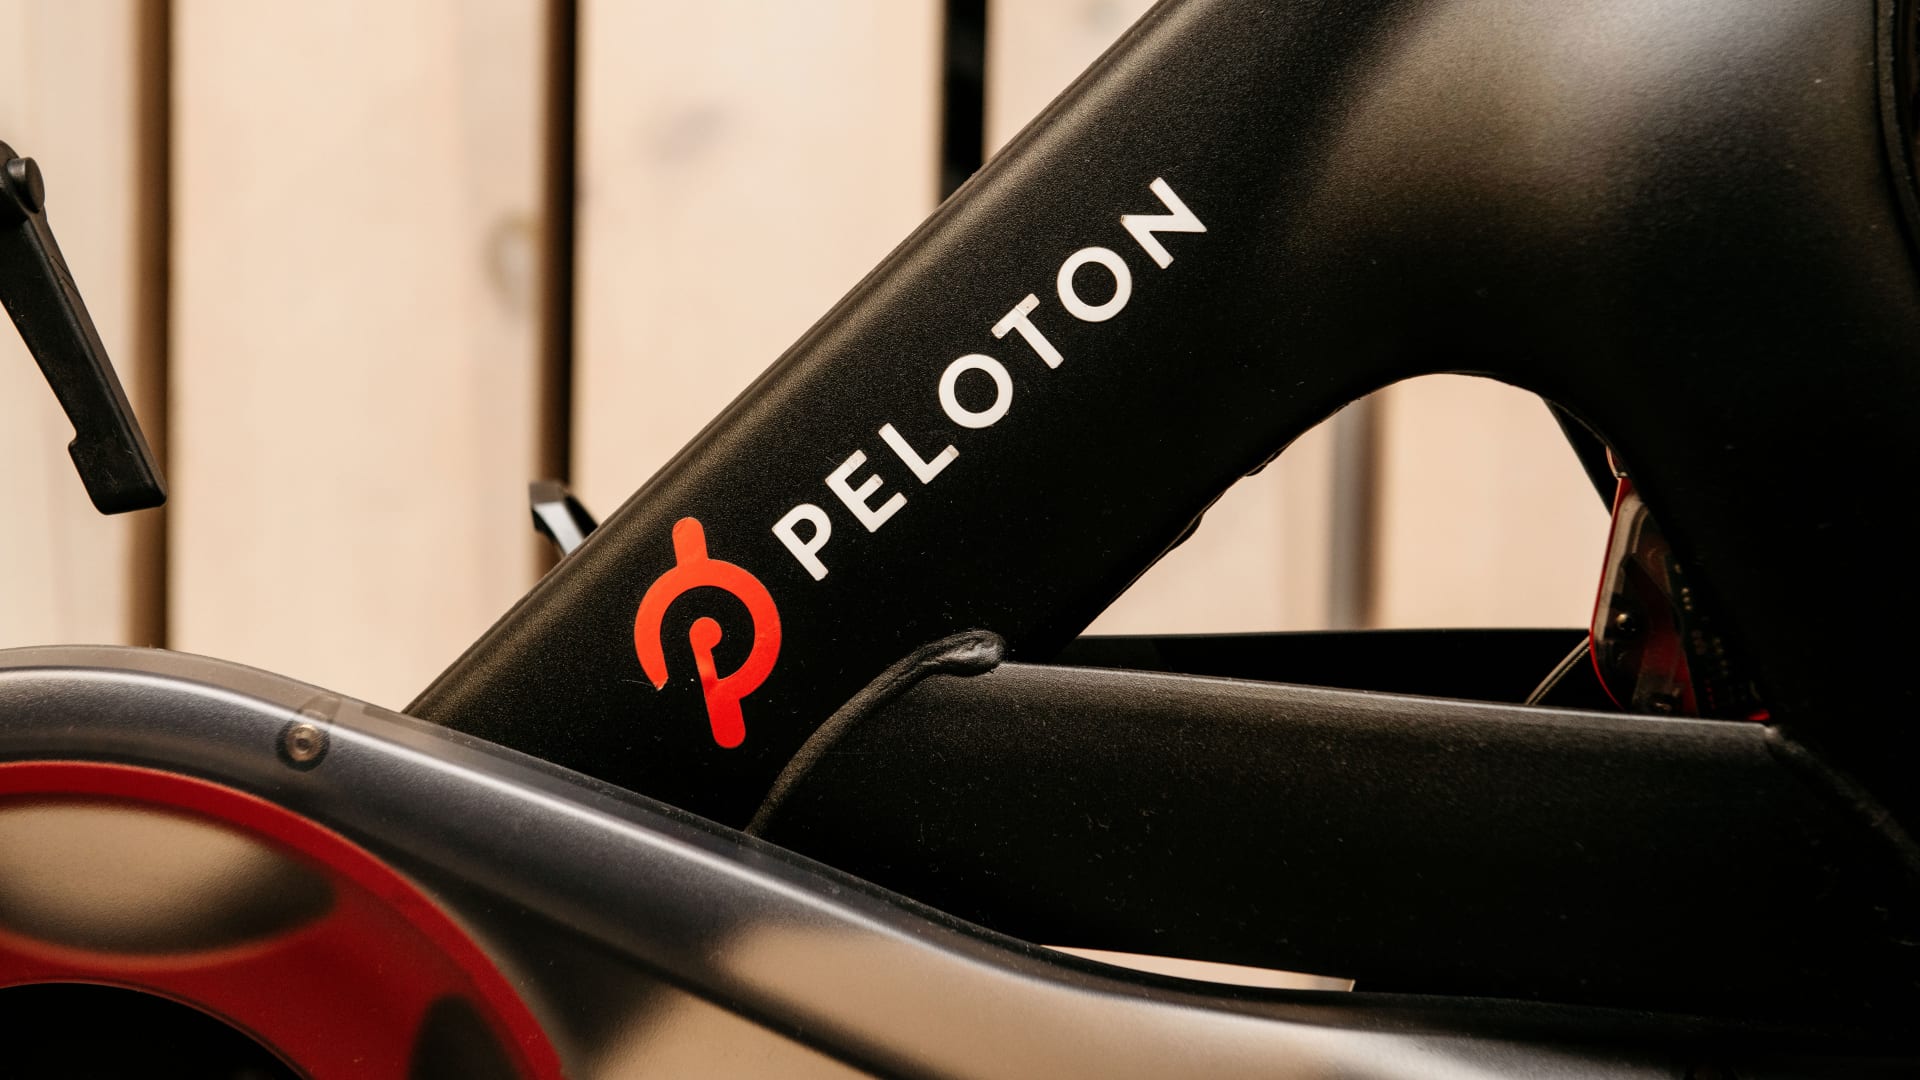 Peloton's New CEO Sent Employees a List of 10 Leadership Principles. This Is the 1 That Matters Most